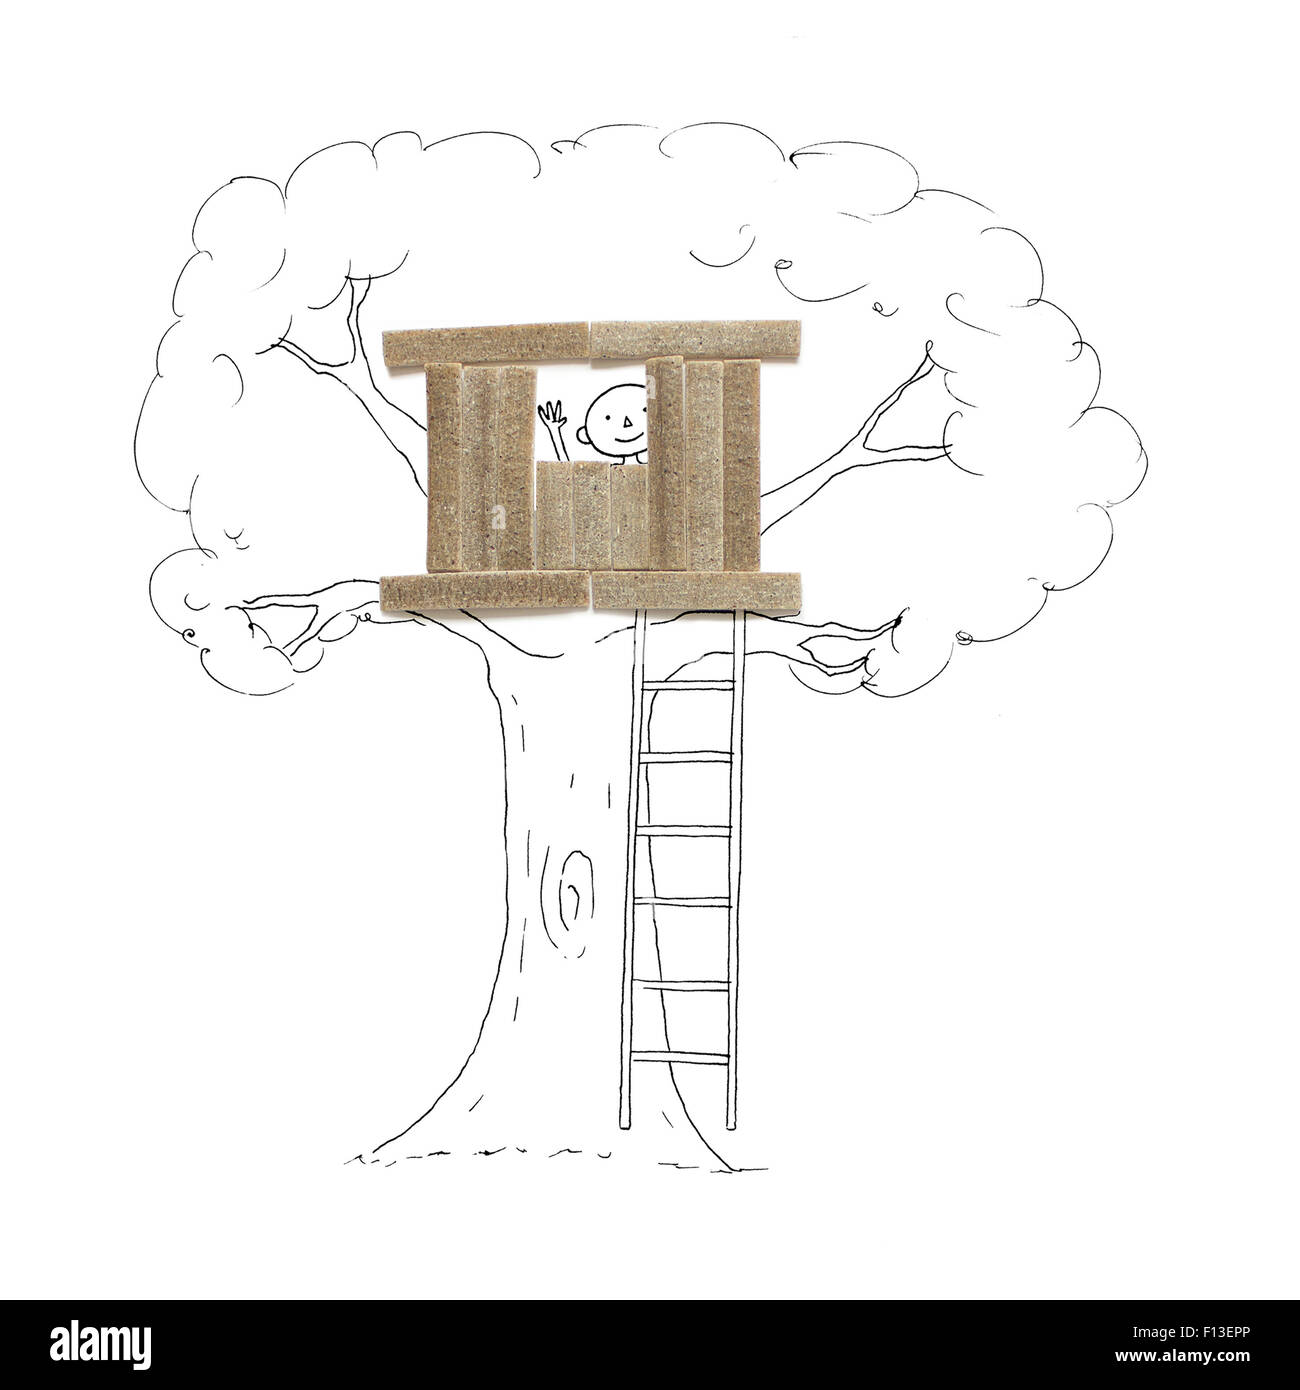 Beginner Cutting Activities for Young Kids - The Inspired Treehouse